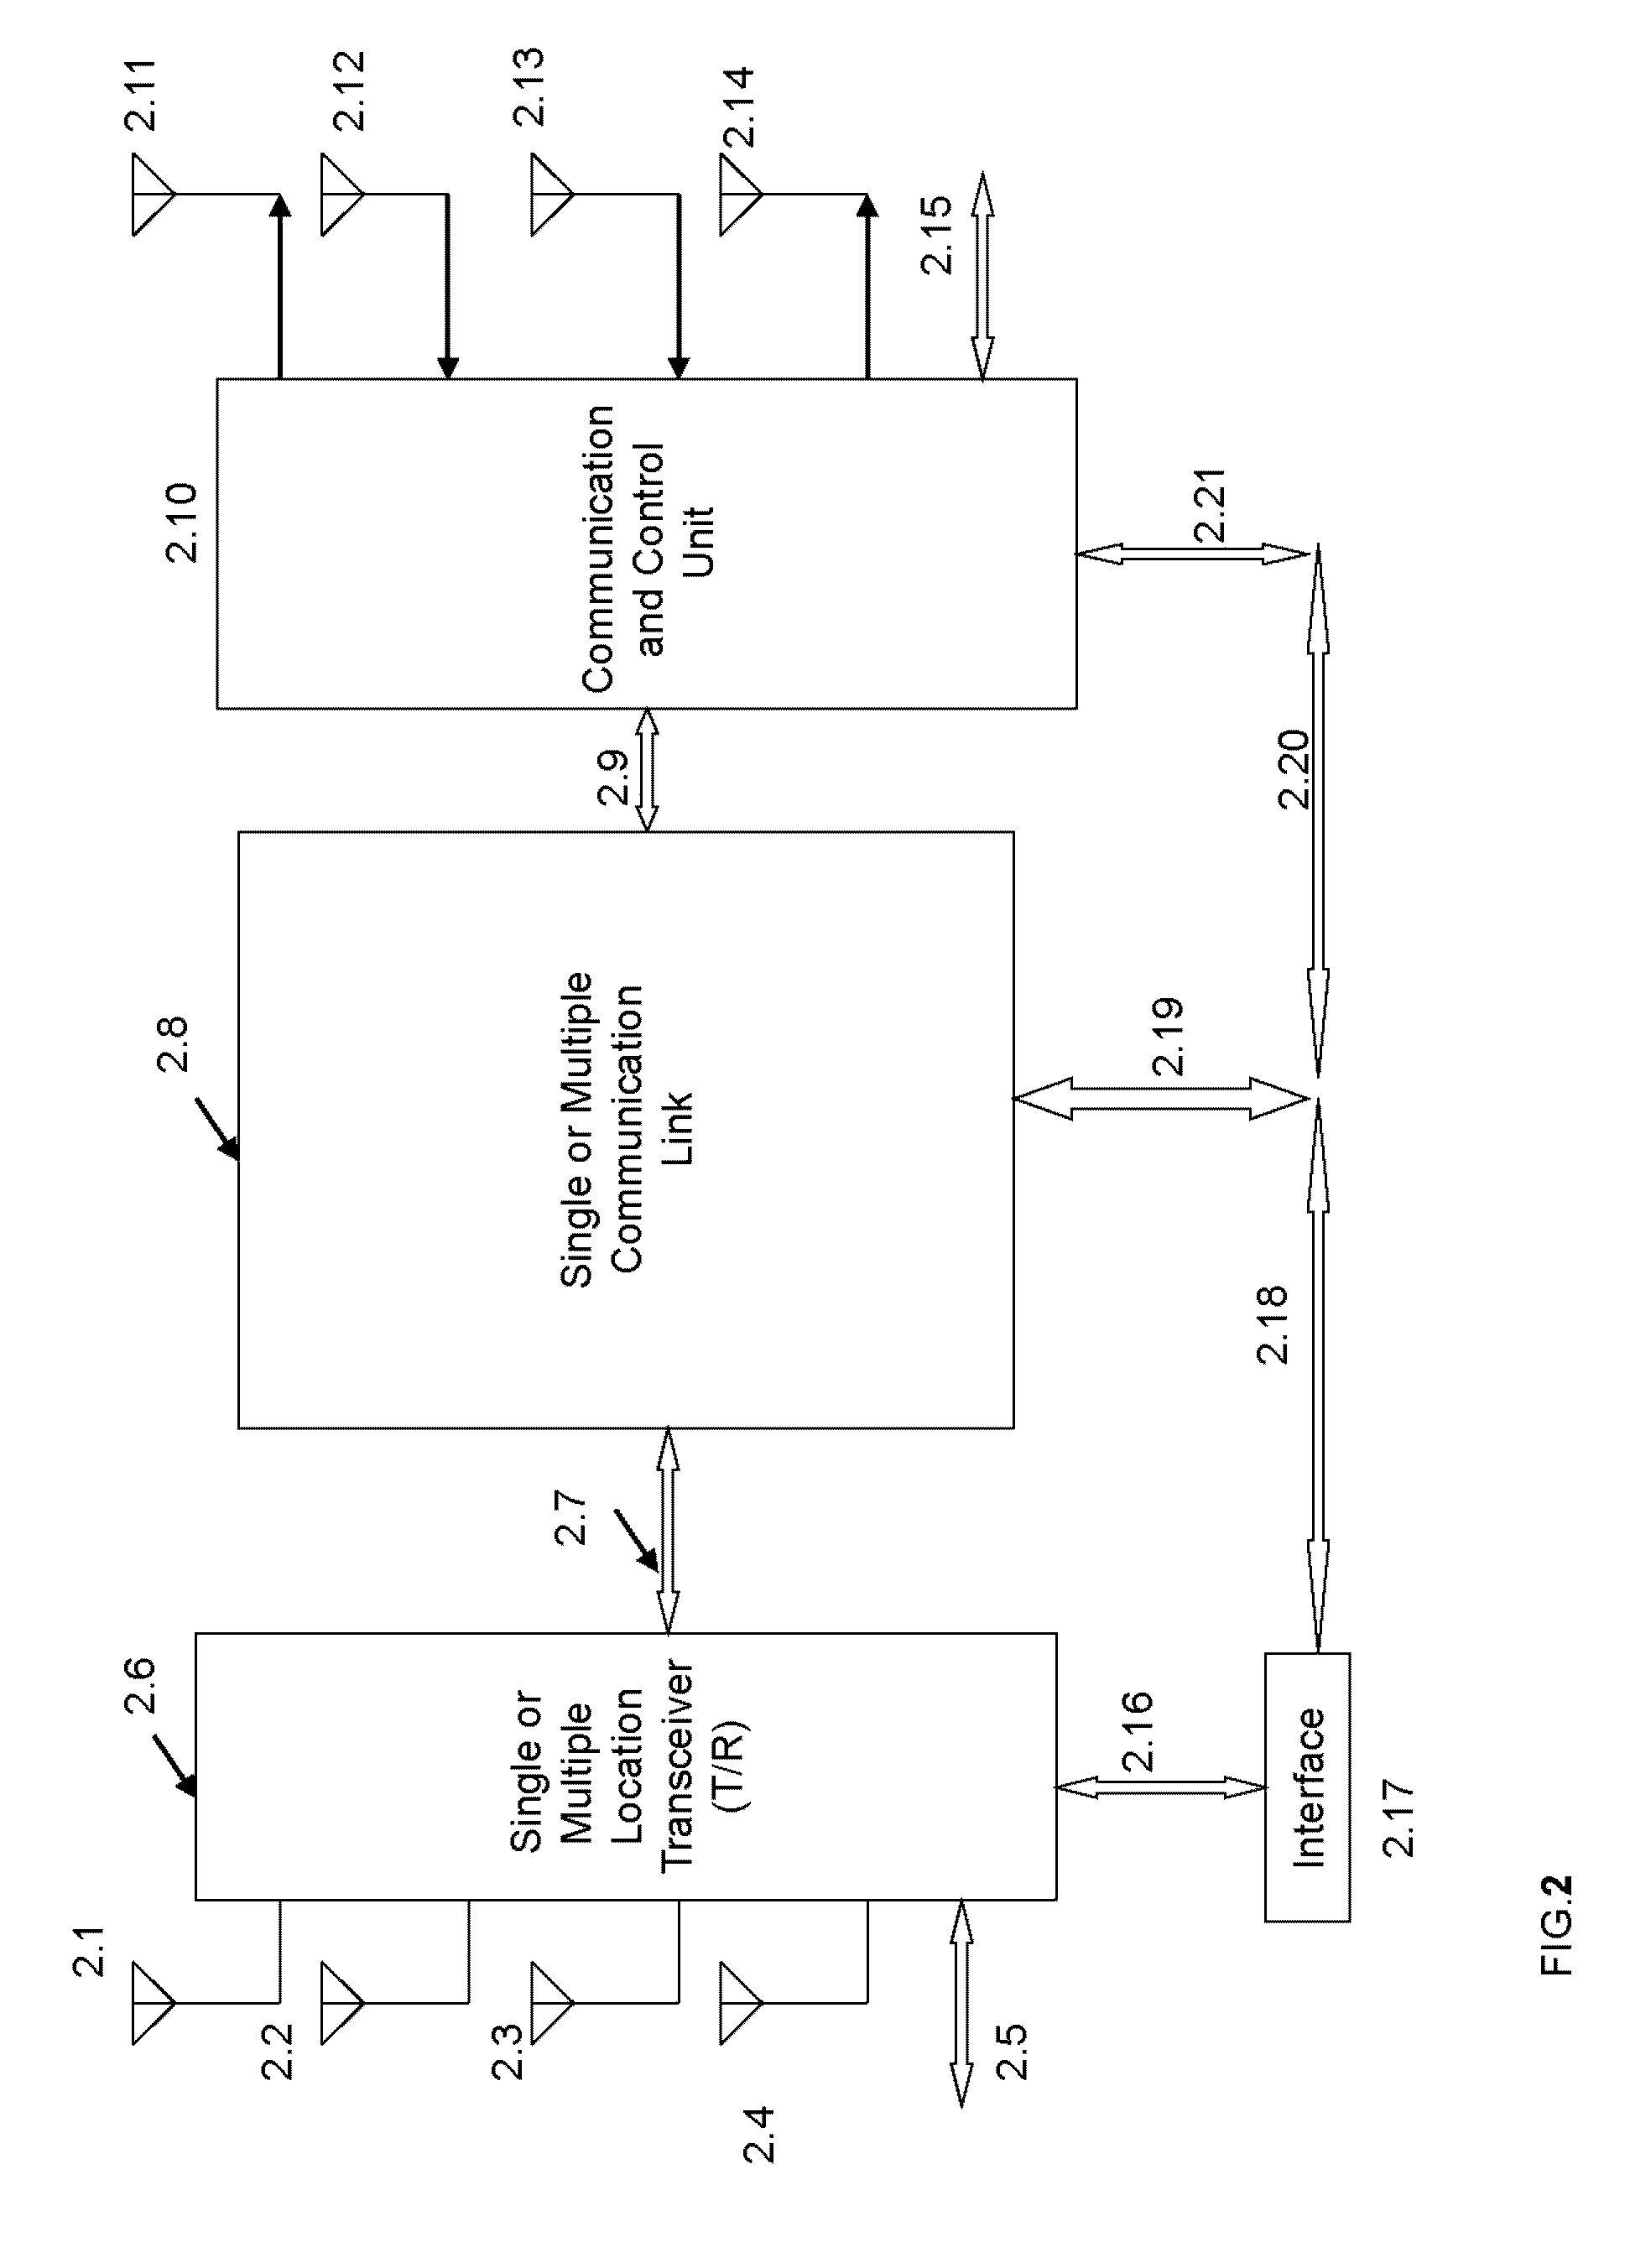 Base Station Devices and Automobile Wireless Communication Systems